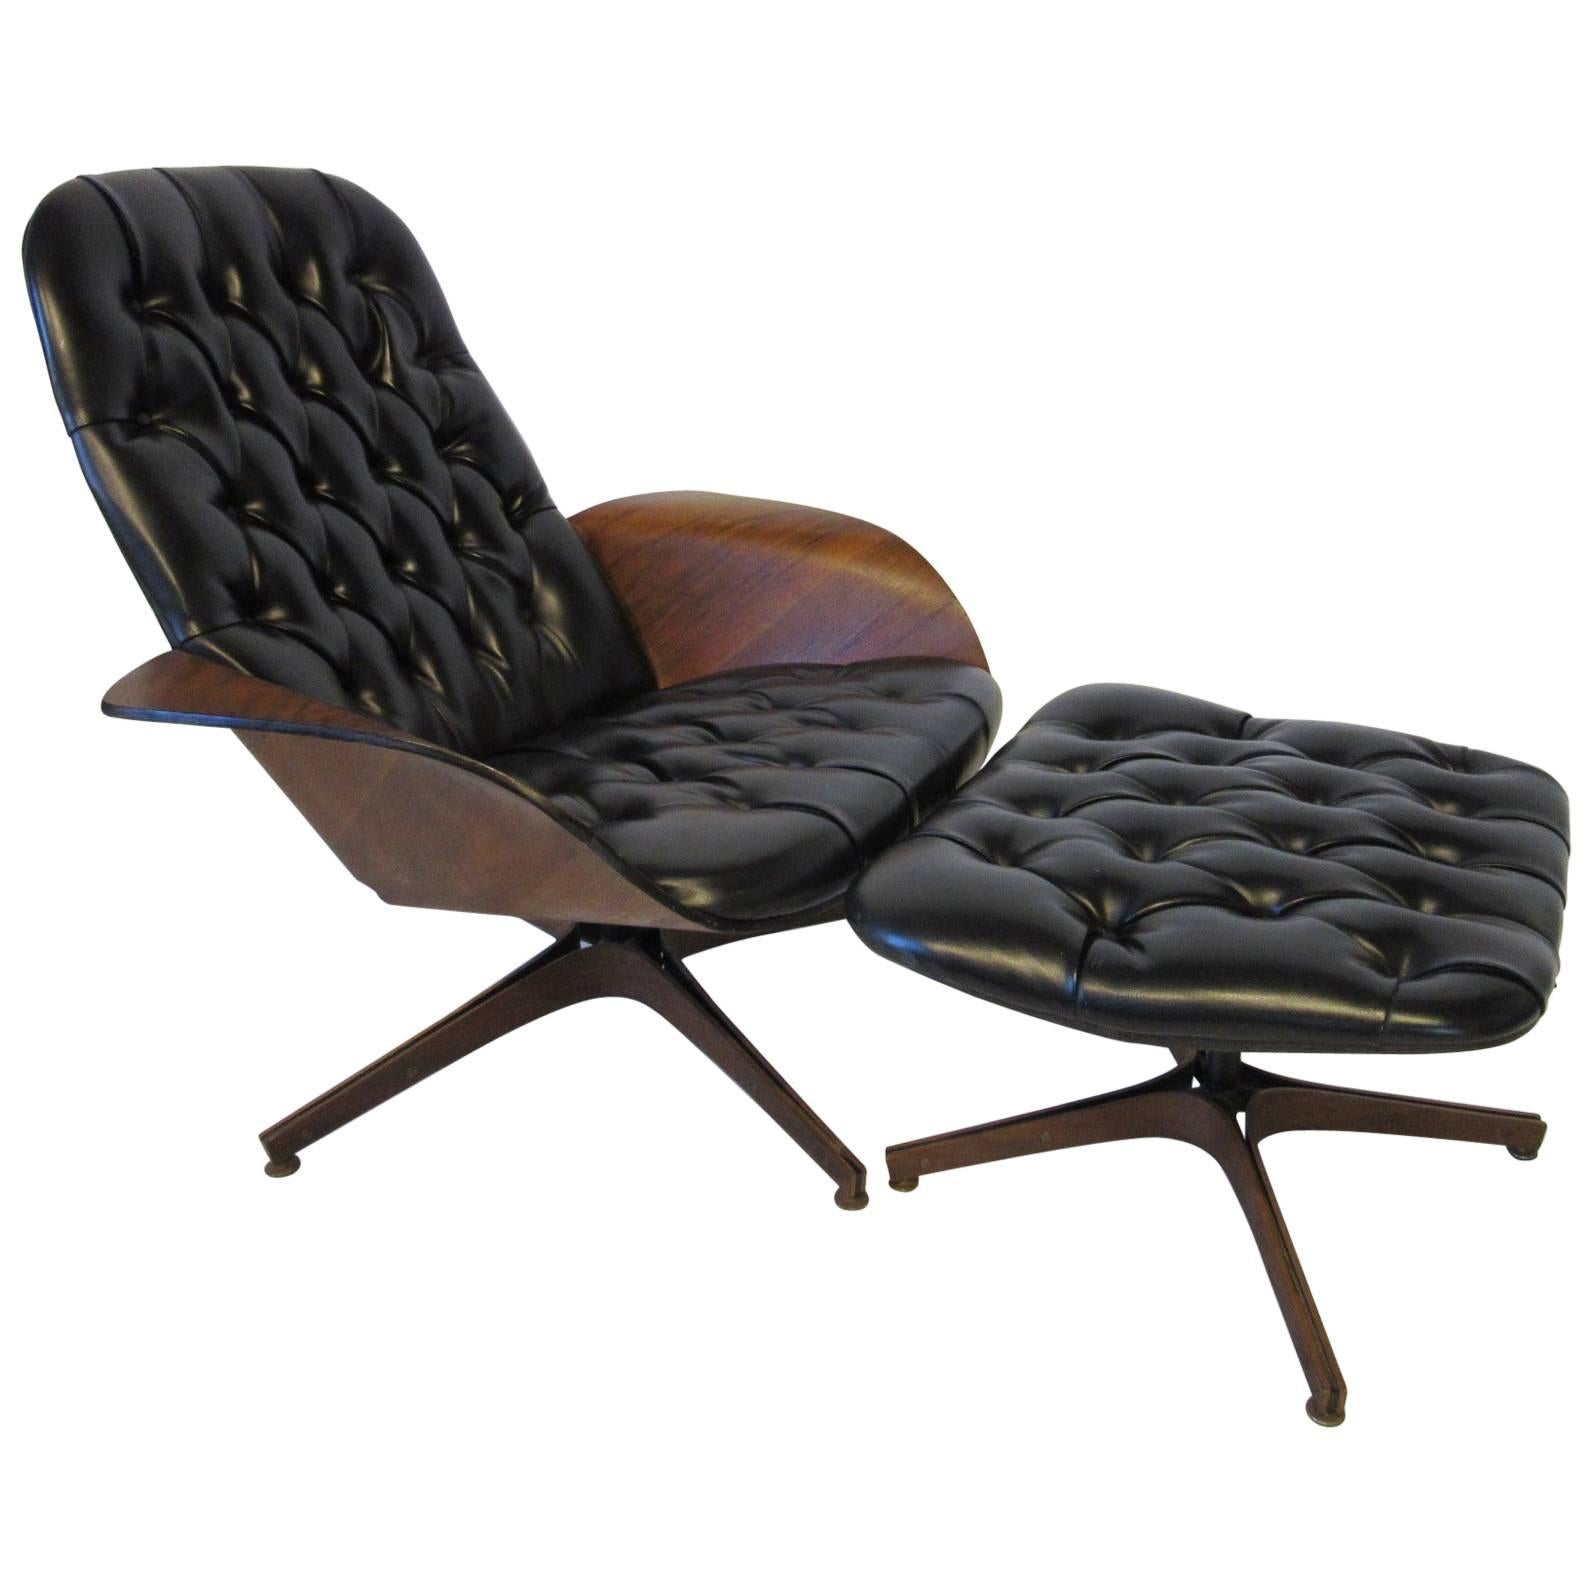 Plycraft "Mr. Chair" Lounge Chair and Ottoman by George Mulhauser